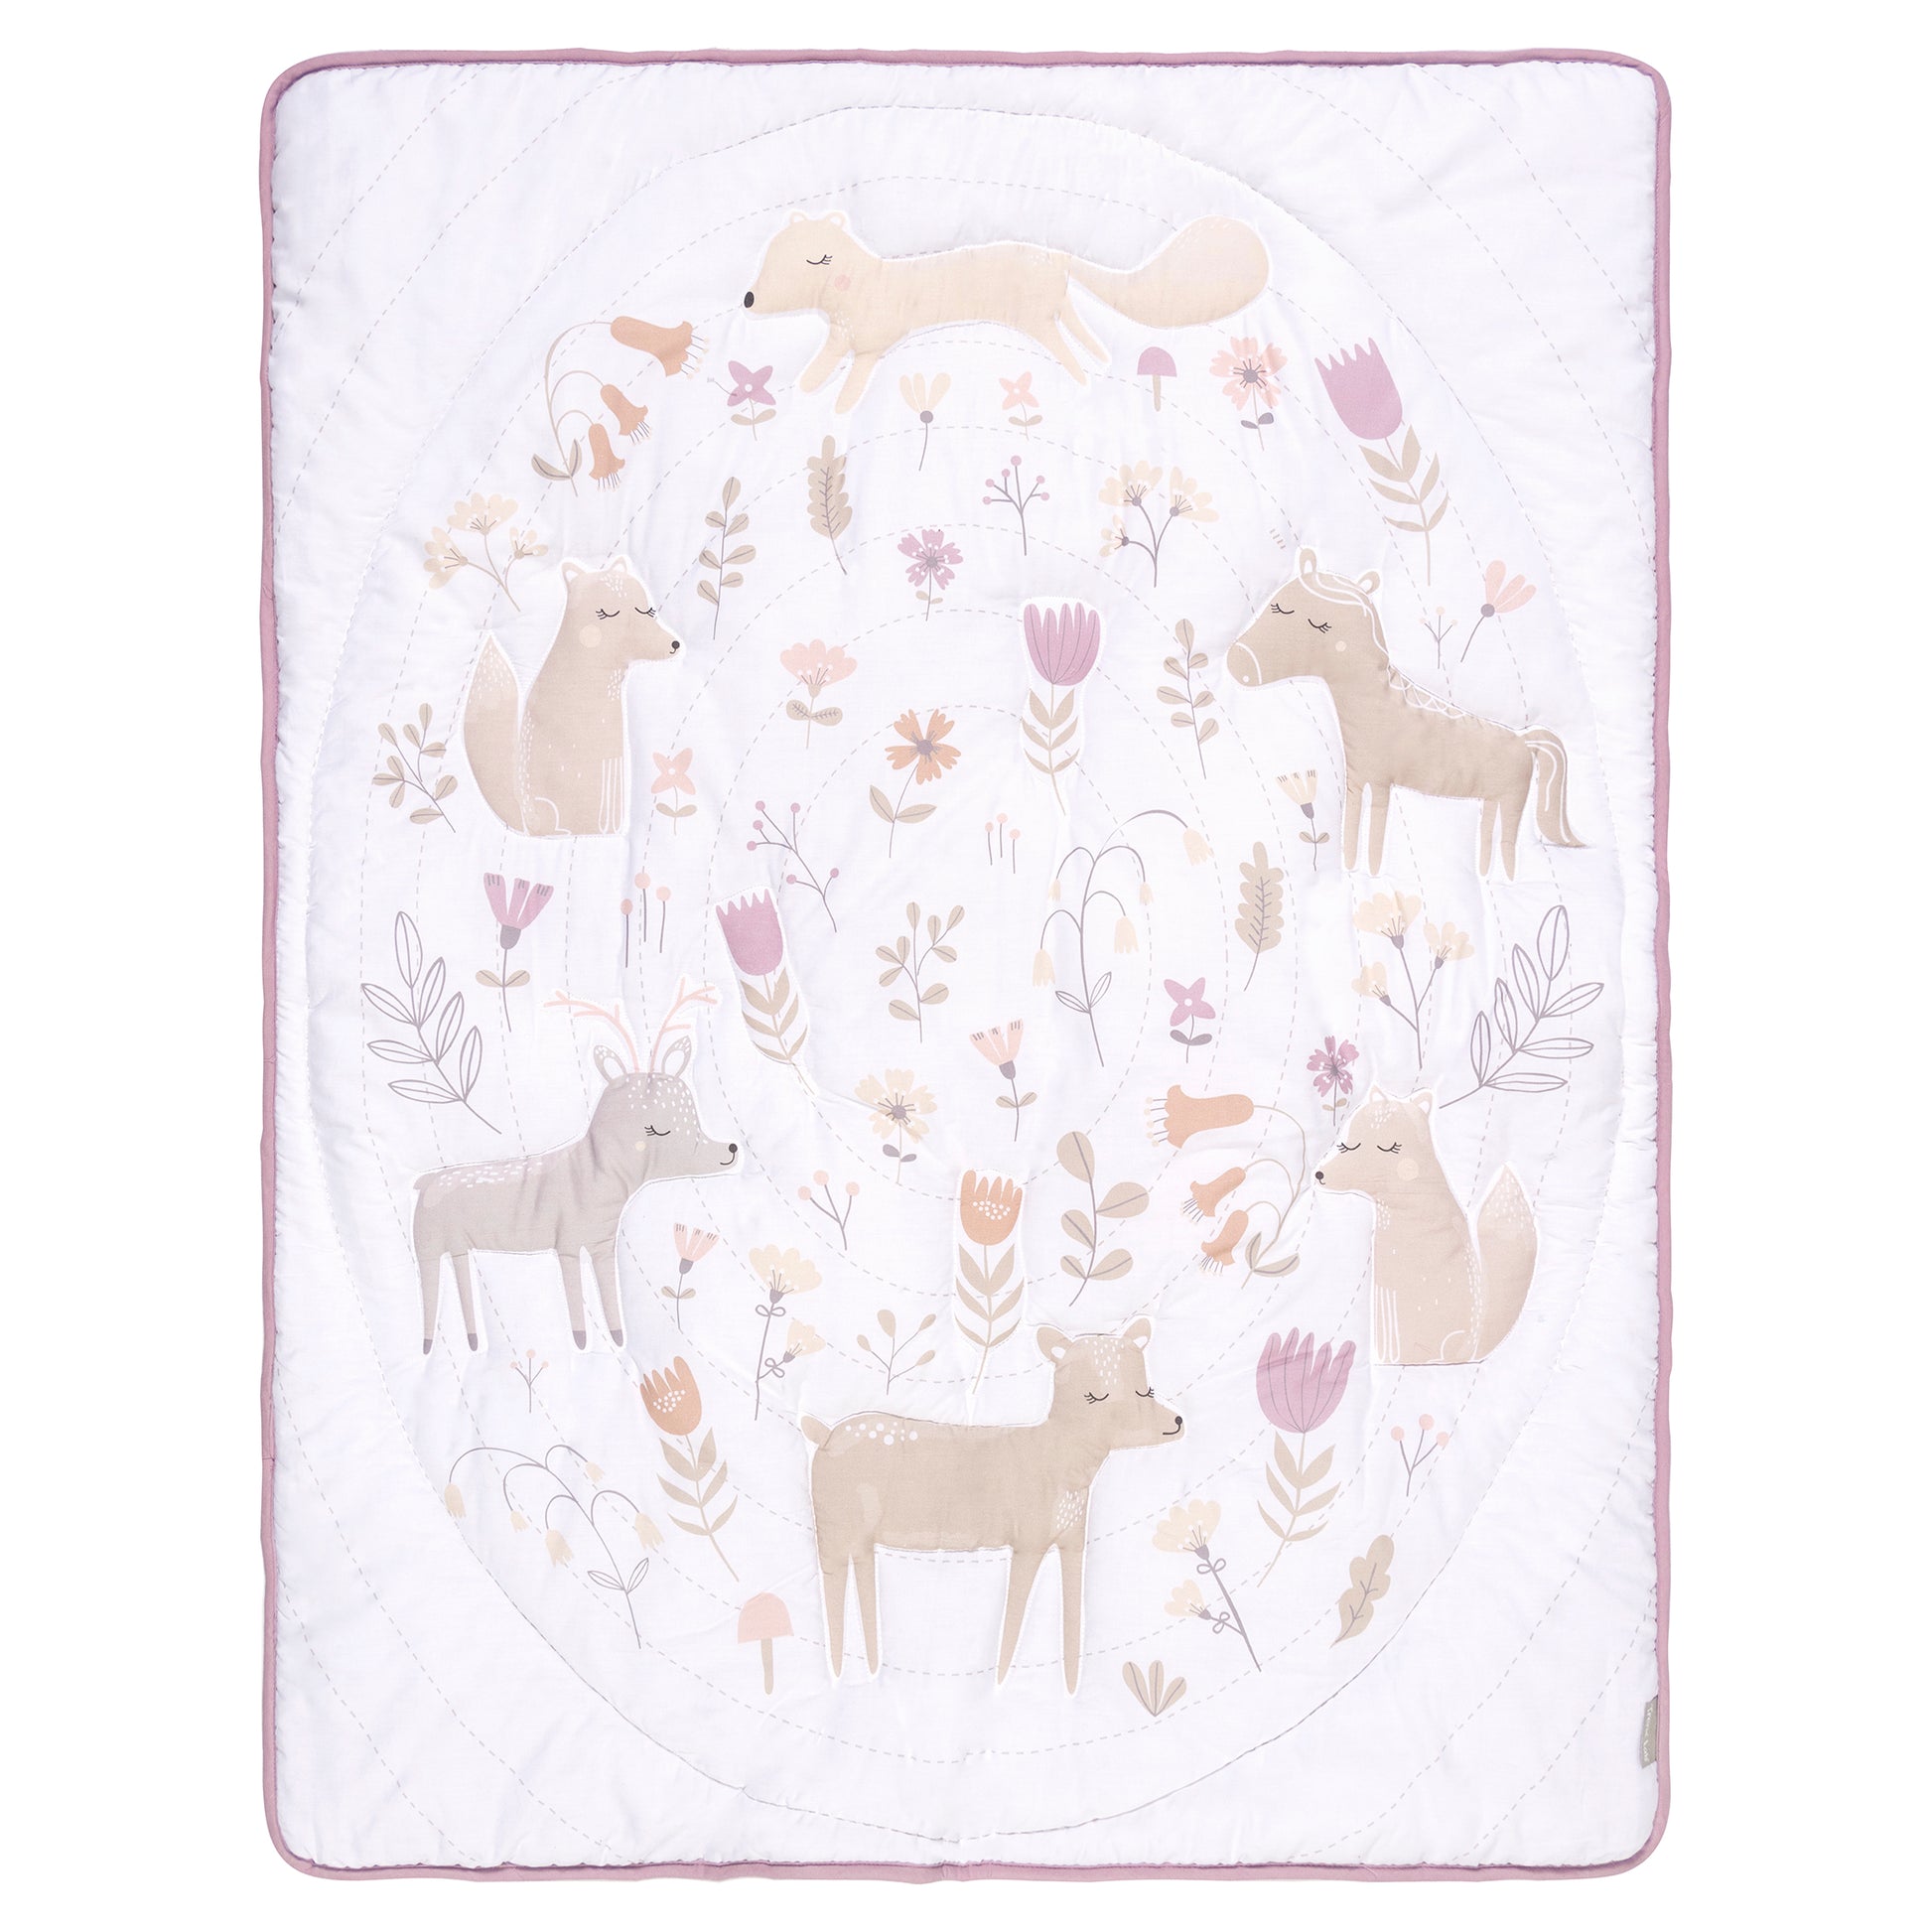  Forest Garden 4 Piece Crib Bedding Set; front view, crib quilt features Nursery quilt measures 35 in x 45 in and features a fox, deer, and unicorn surrounding a floral meadow. The nursery quilt is a great 2-in-1 option and can be used as a blanket or a 